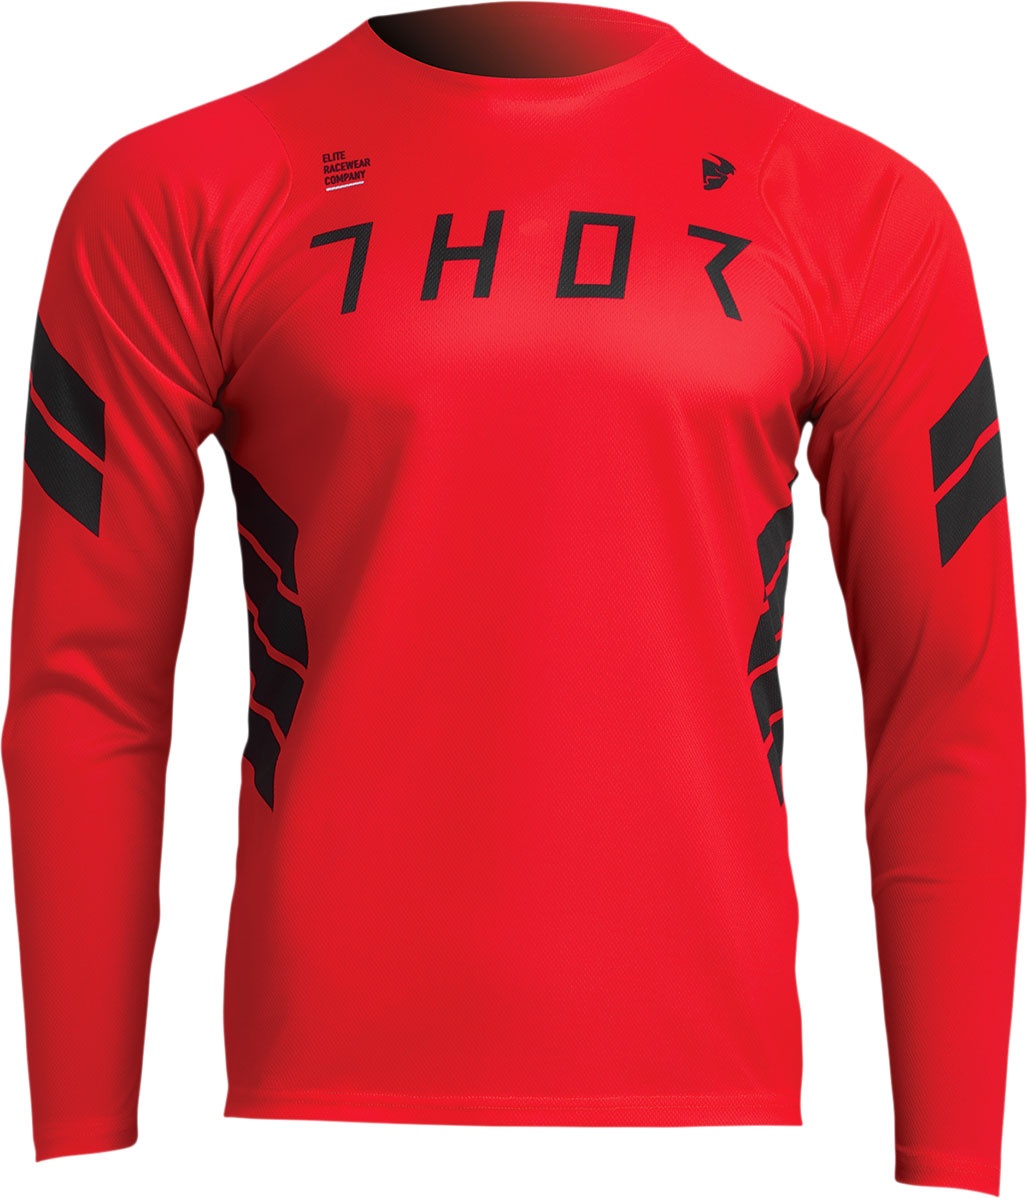 Thor Assist Sting S22, jersey - Rouge/Noir - S